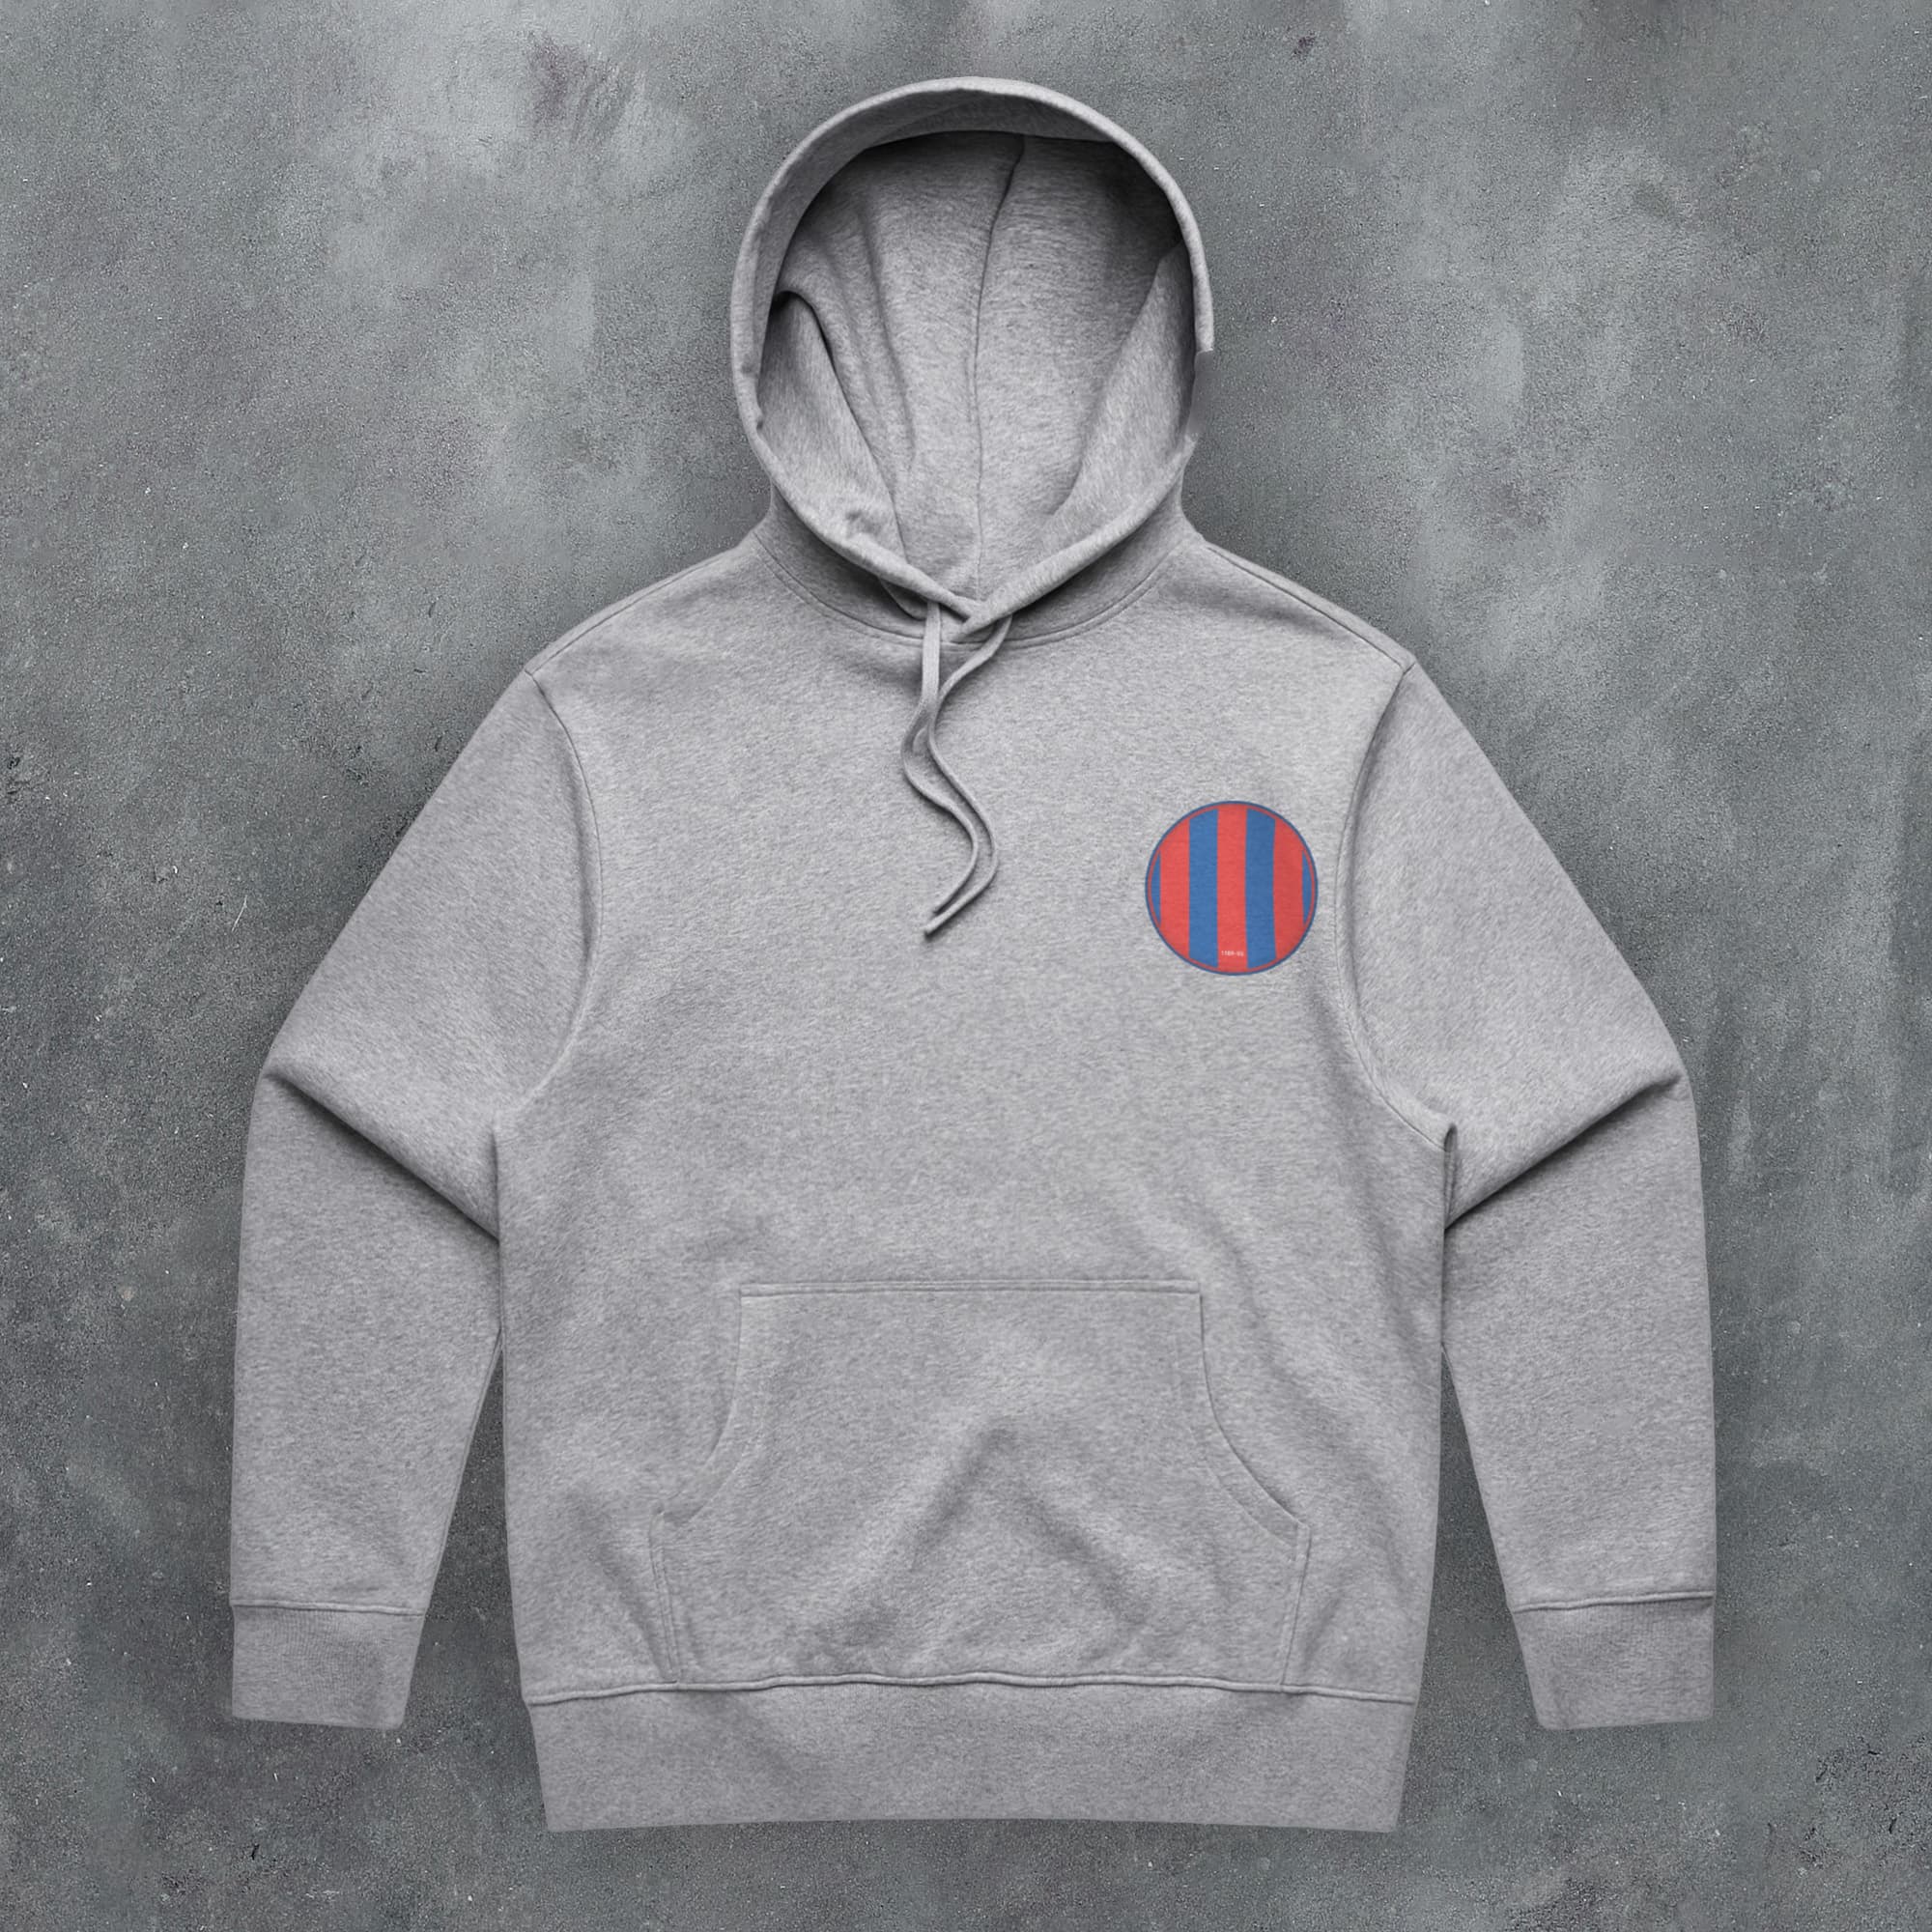 a grey hoodie with a red and blue stripe on it